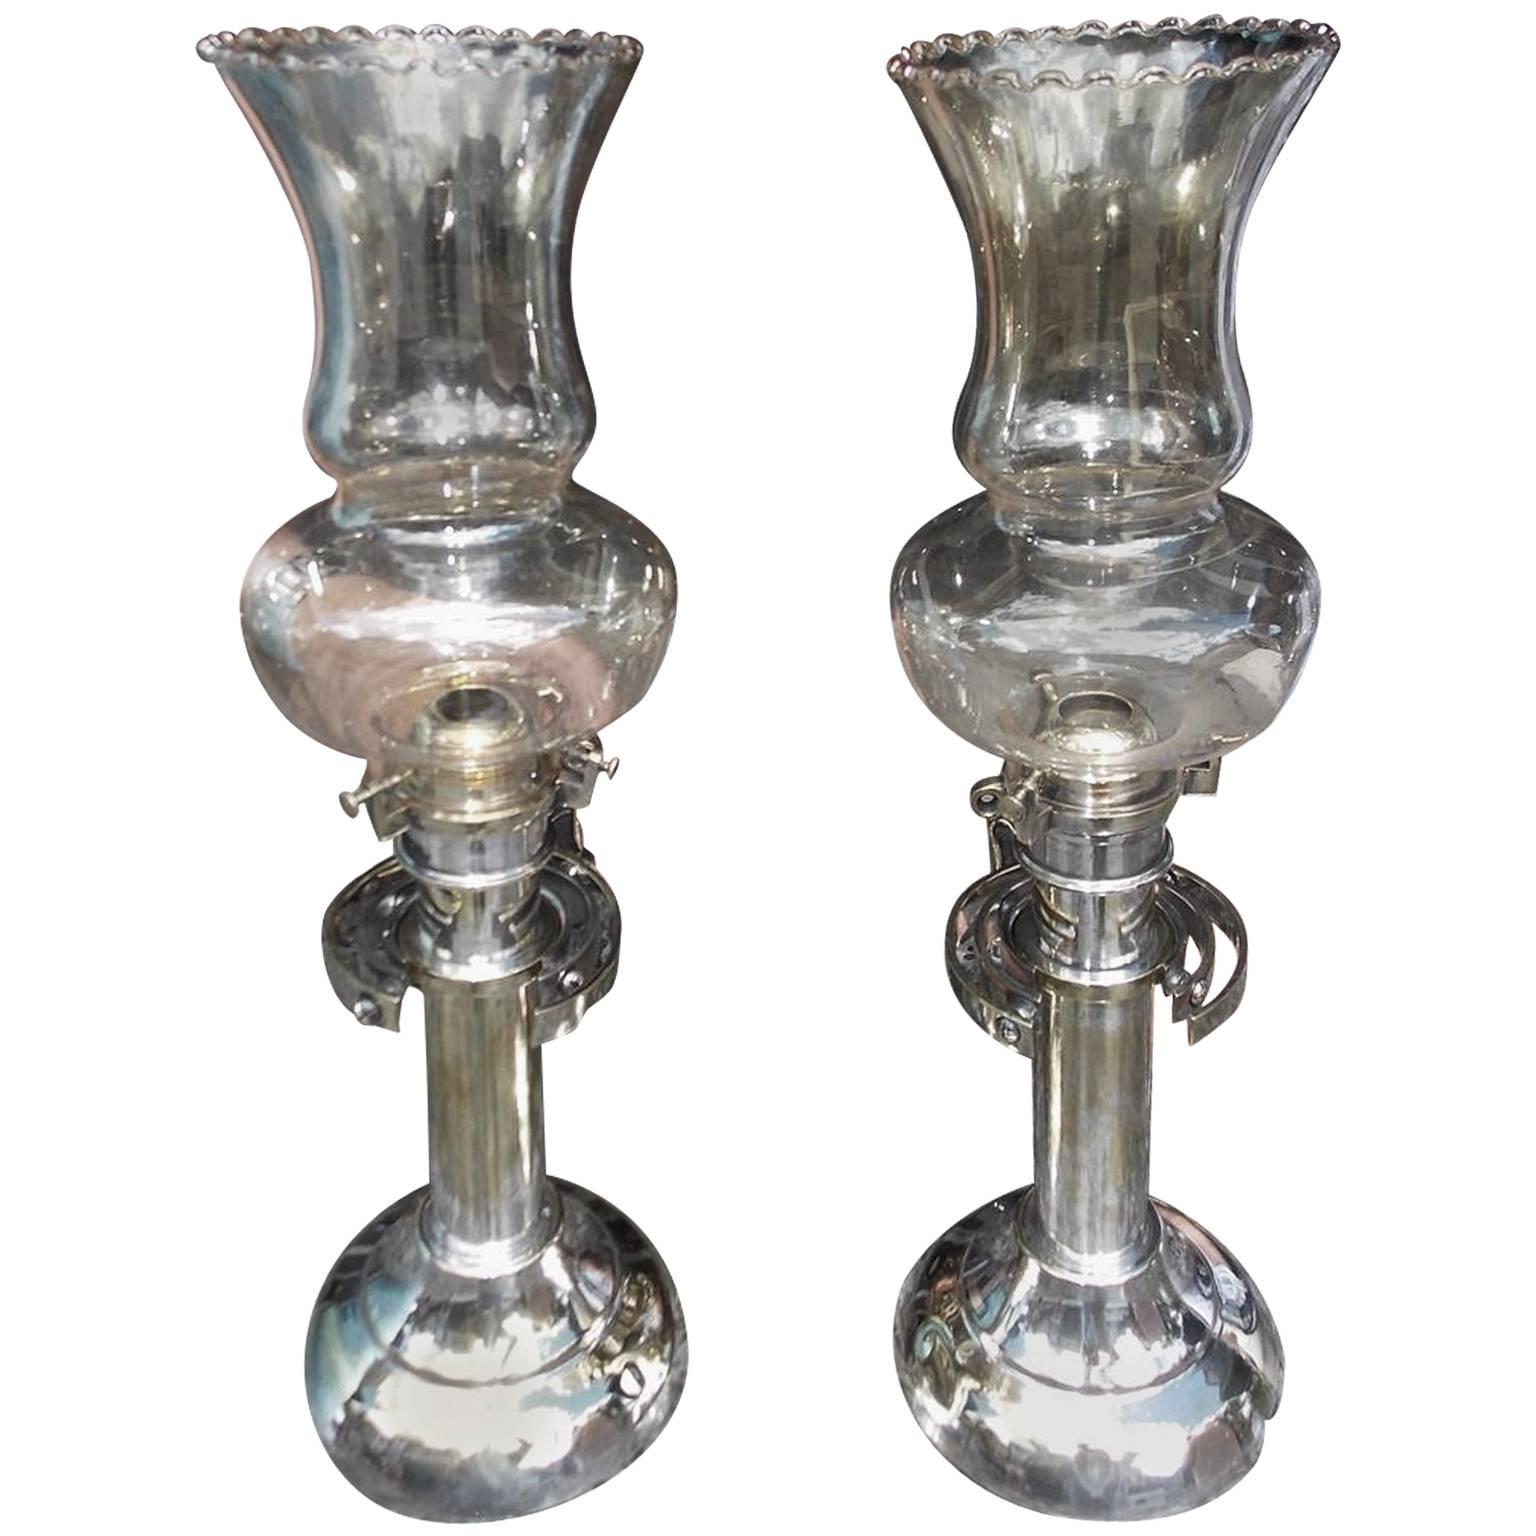 Pair of American Nautical Gimbaled Nickel Silver & Brass Wall Sconces, C. 1850 For Sale